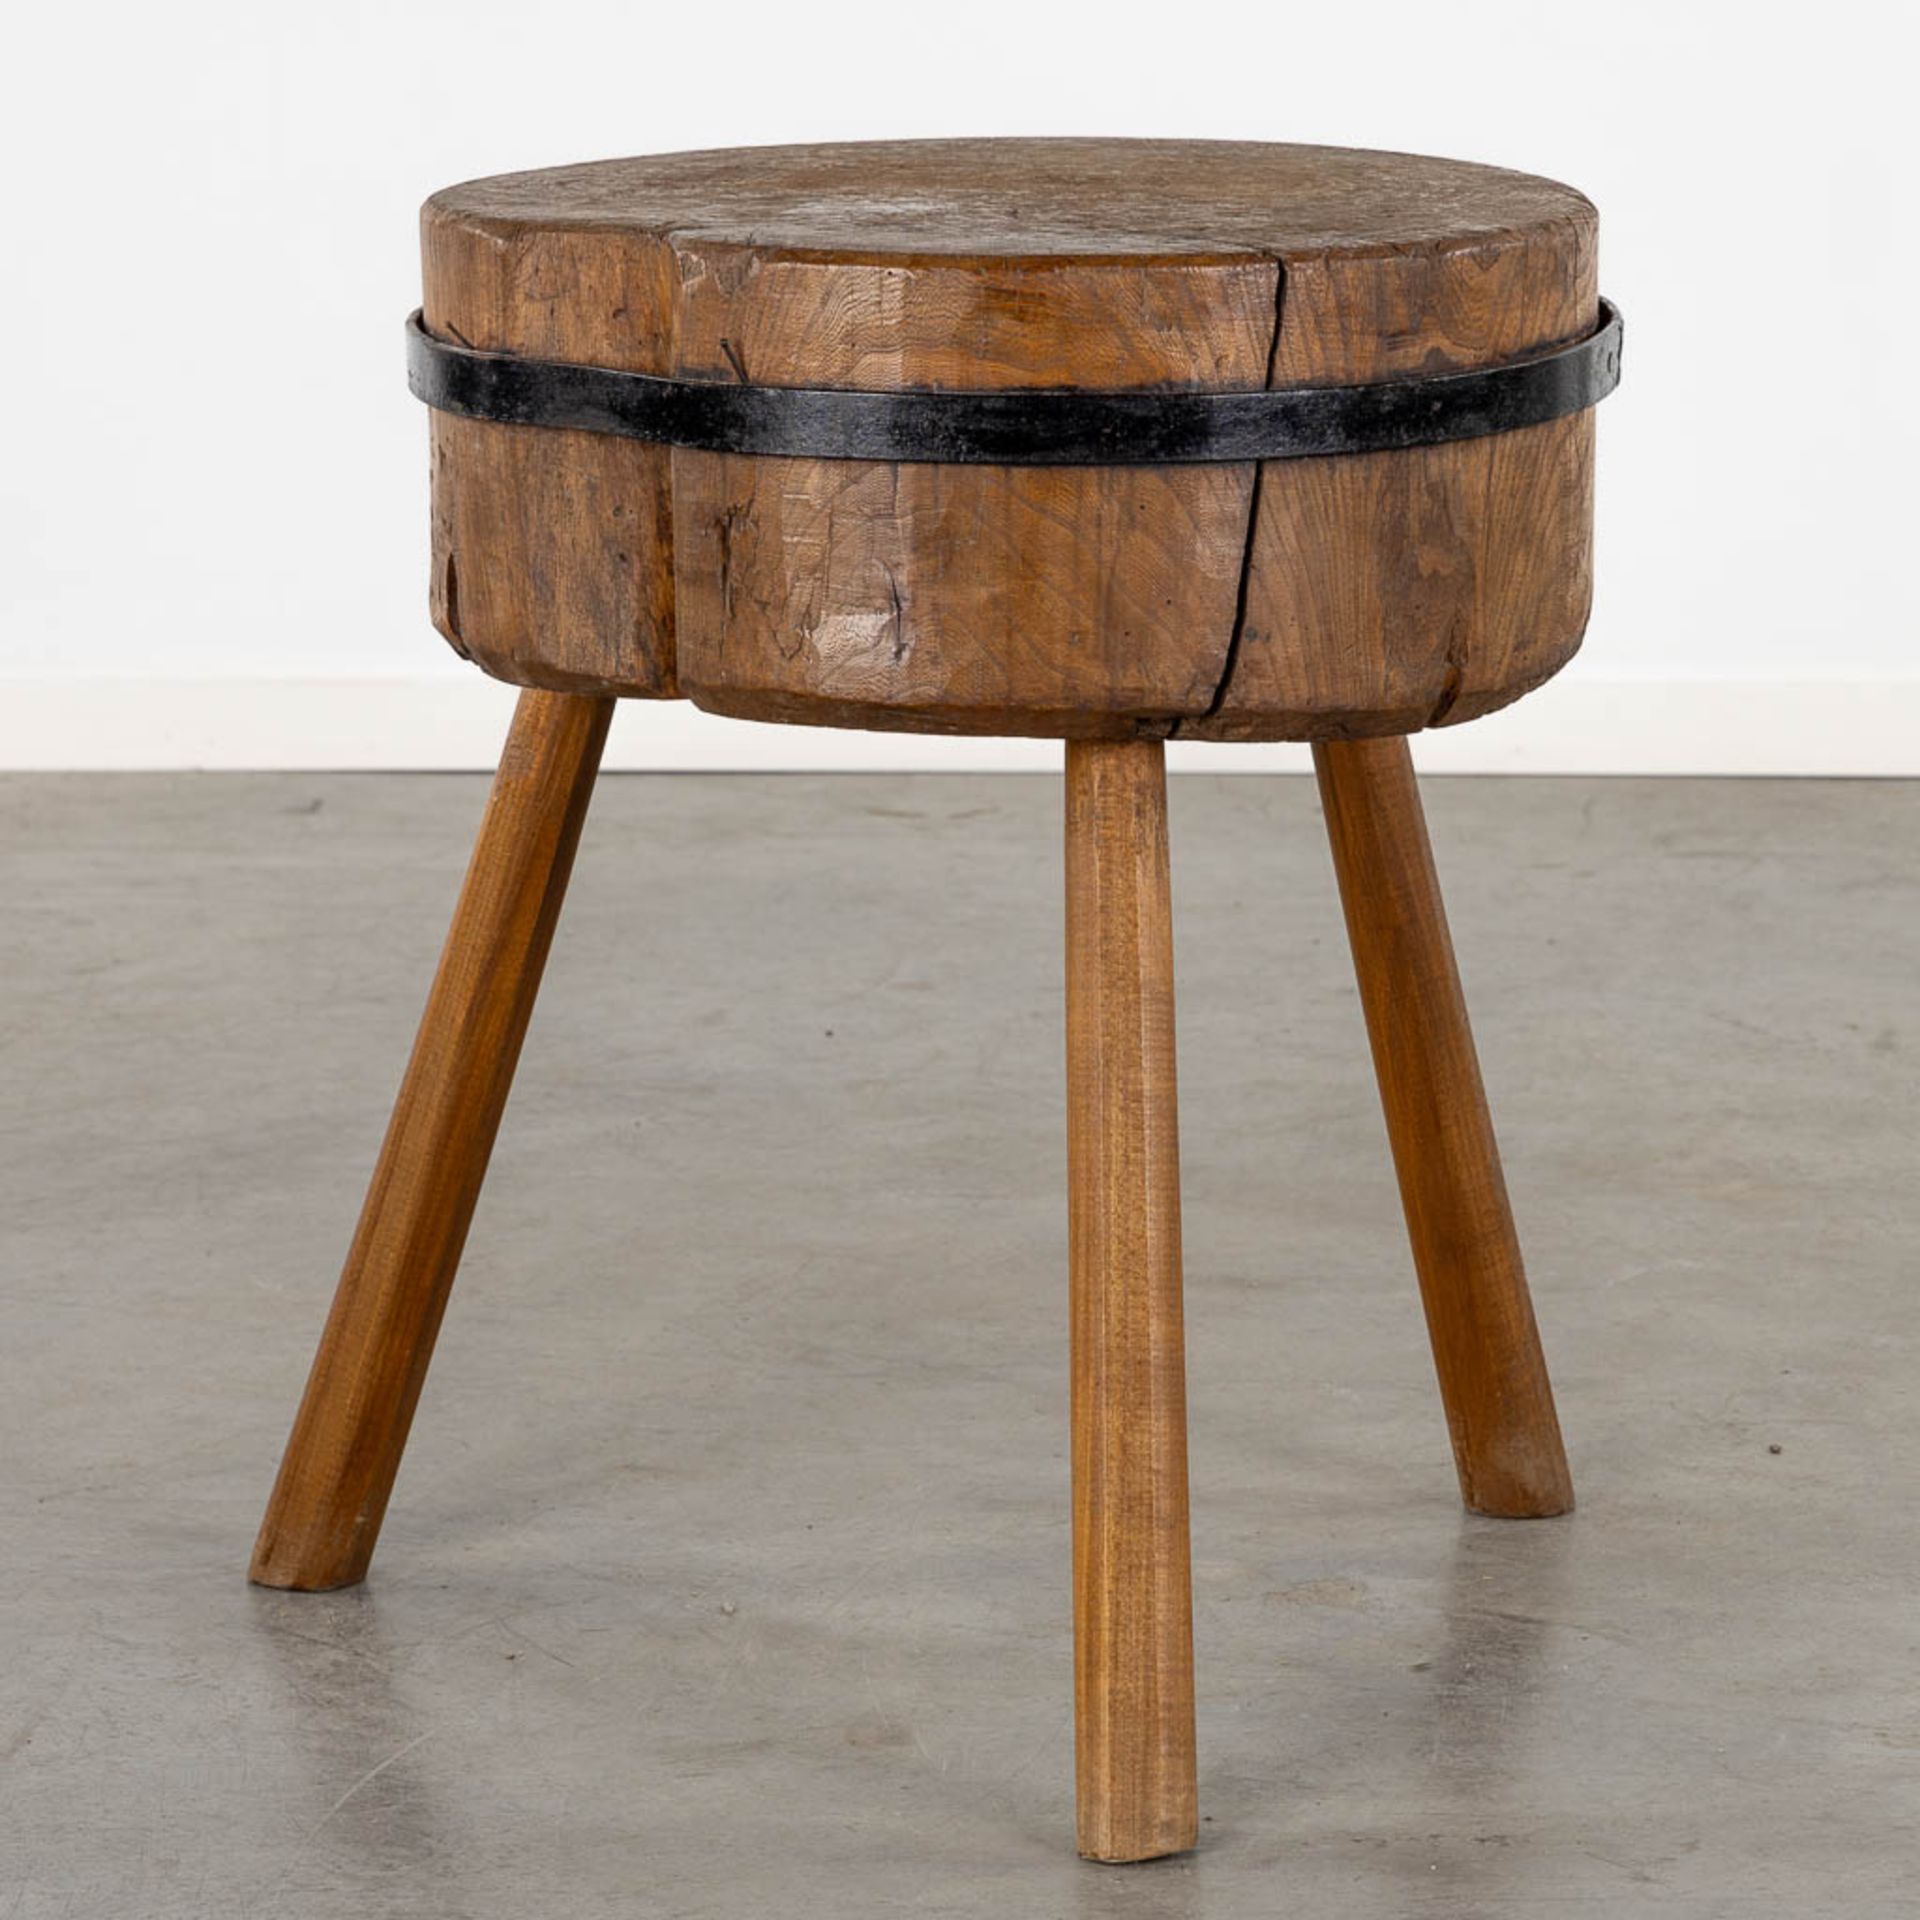 A small and antique 'Butcher's block', standing on three legs. (H:68 x D:56 cm) - Image 4 of 8